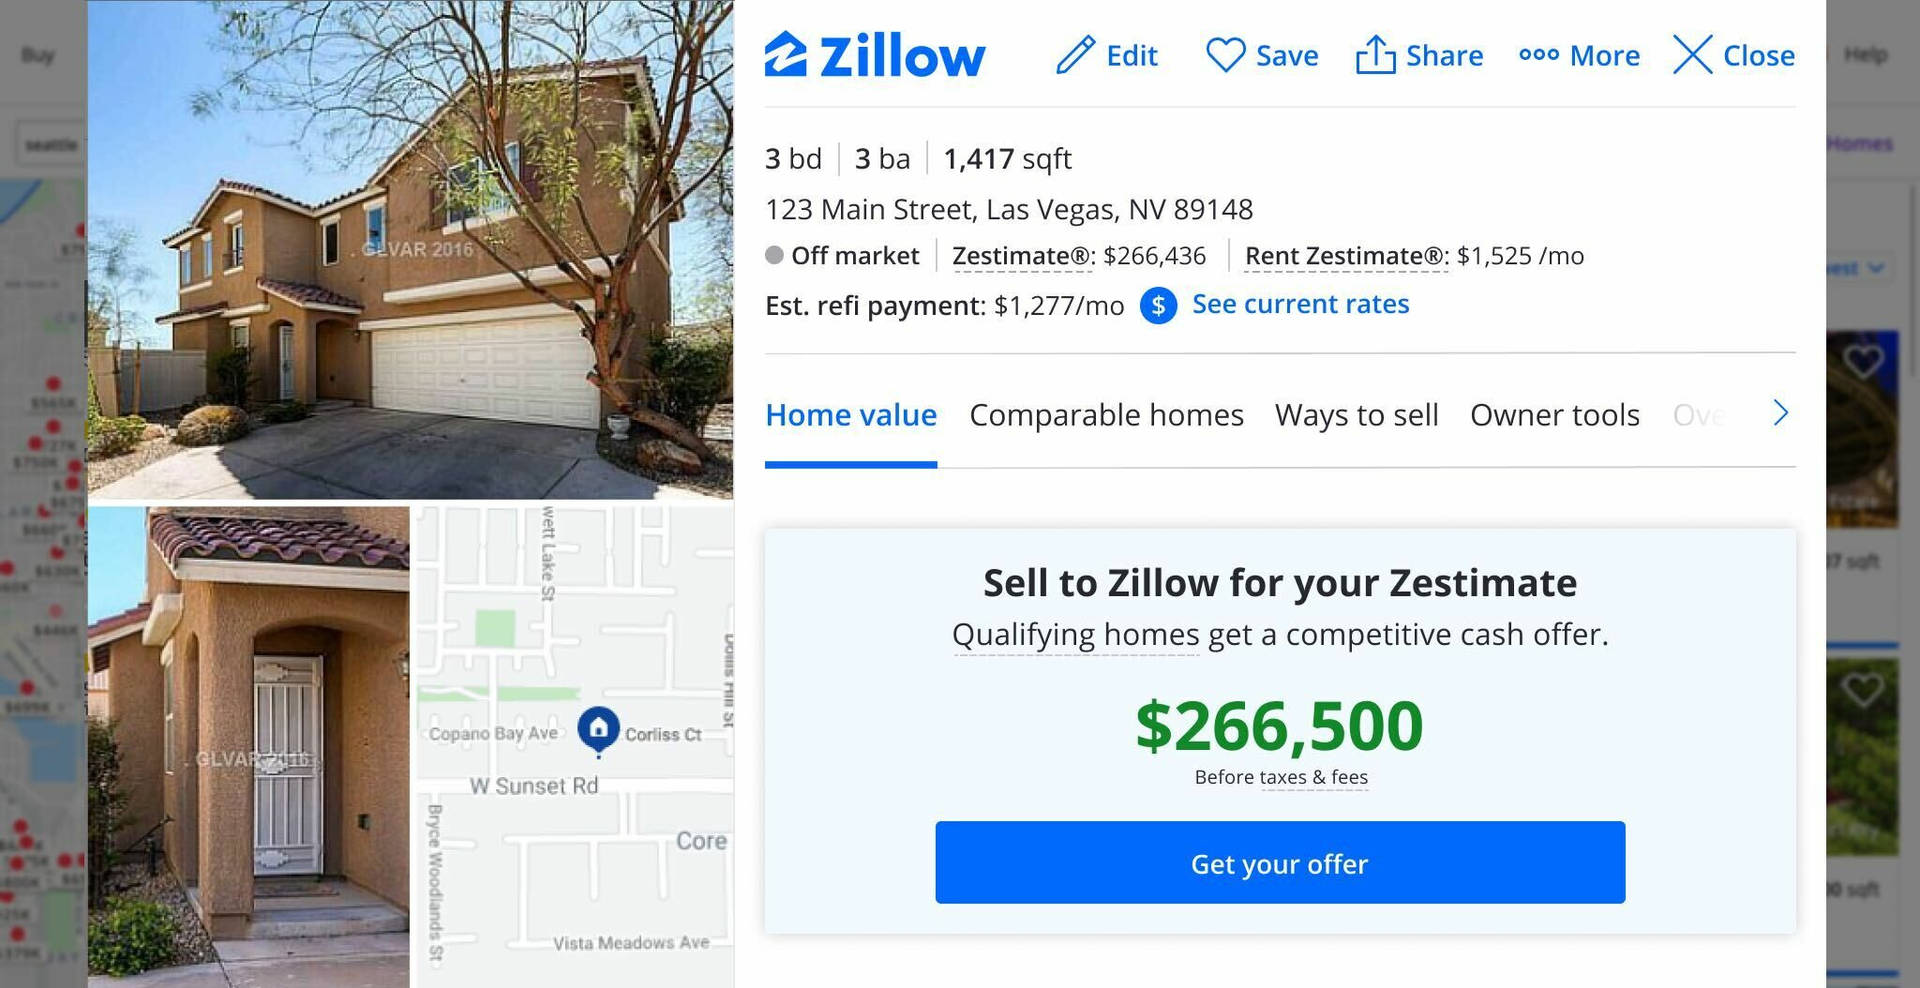 Vintage House showcased on Zillow Wallpaper